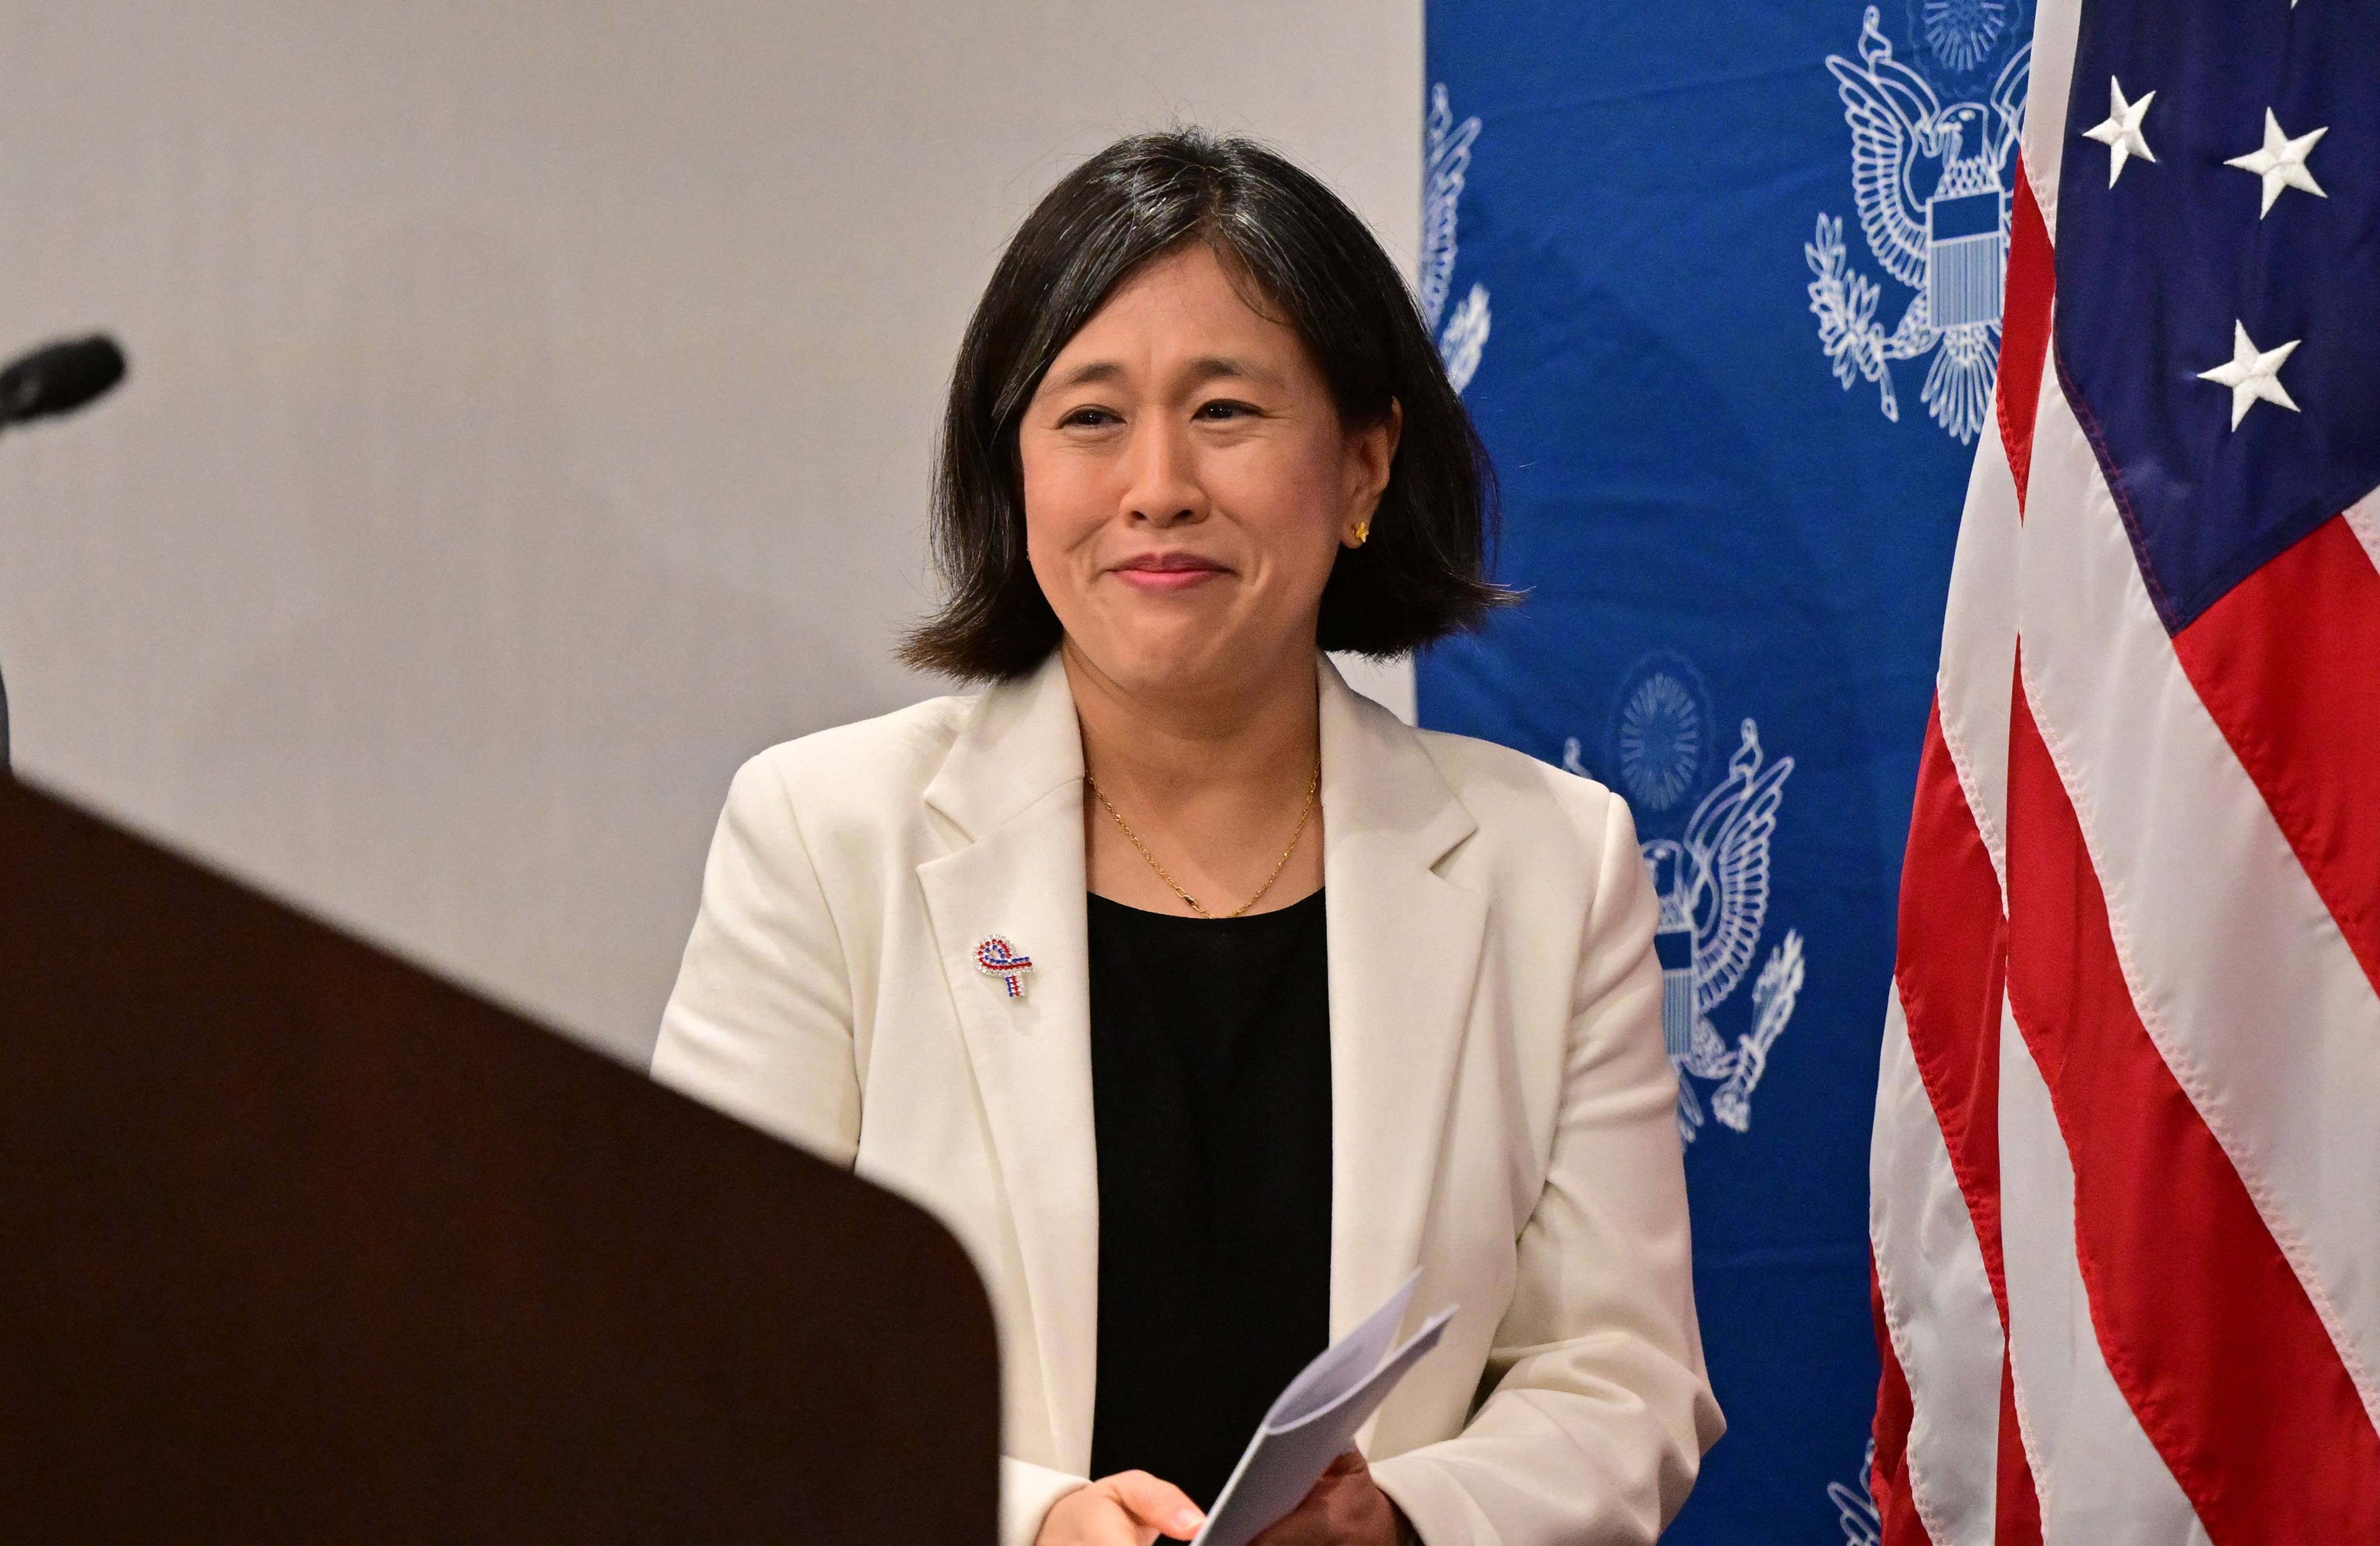 US Trade Representative Katherine Tai has described the 2½ years of tariffs review as ‘tremendously consequential’. Photo: AFP